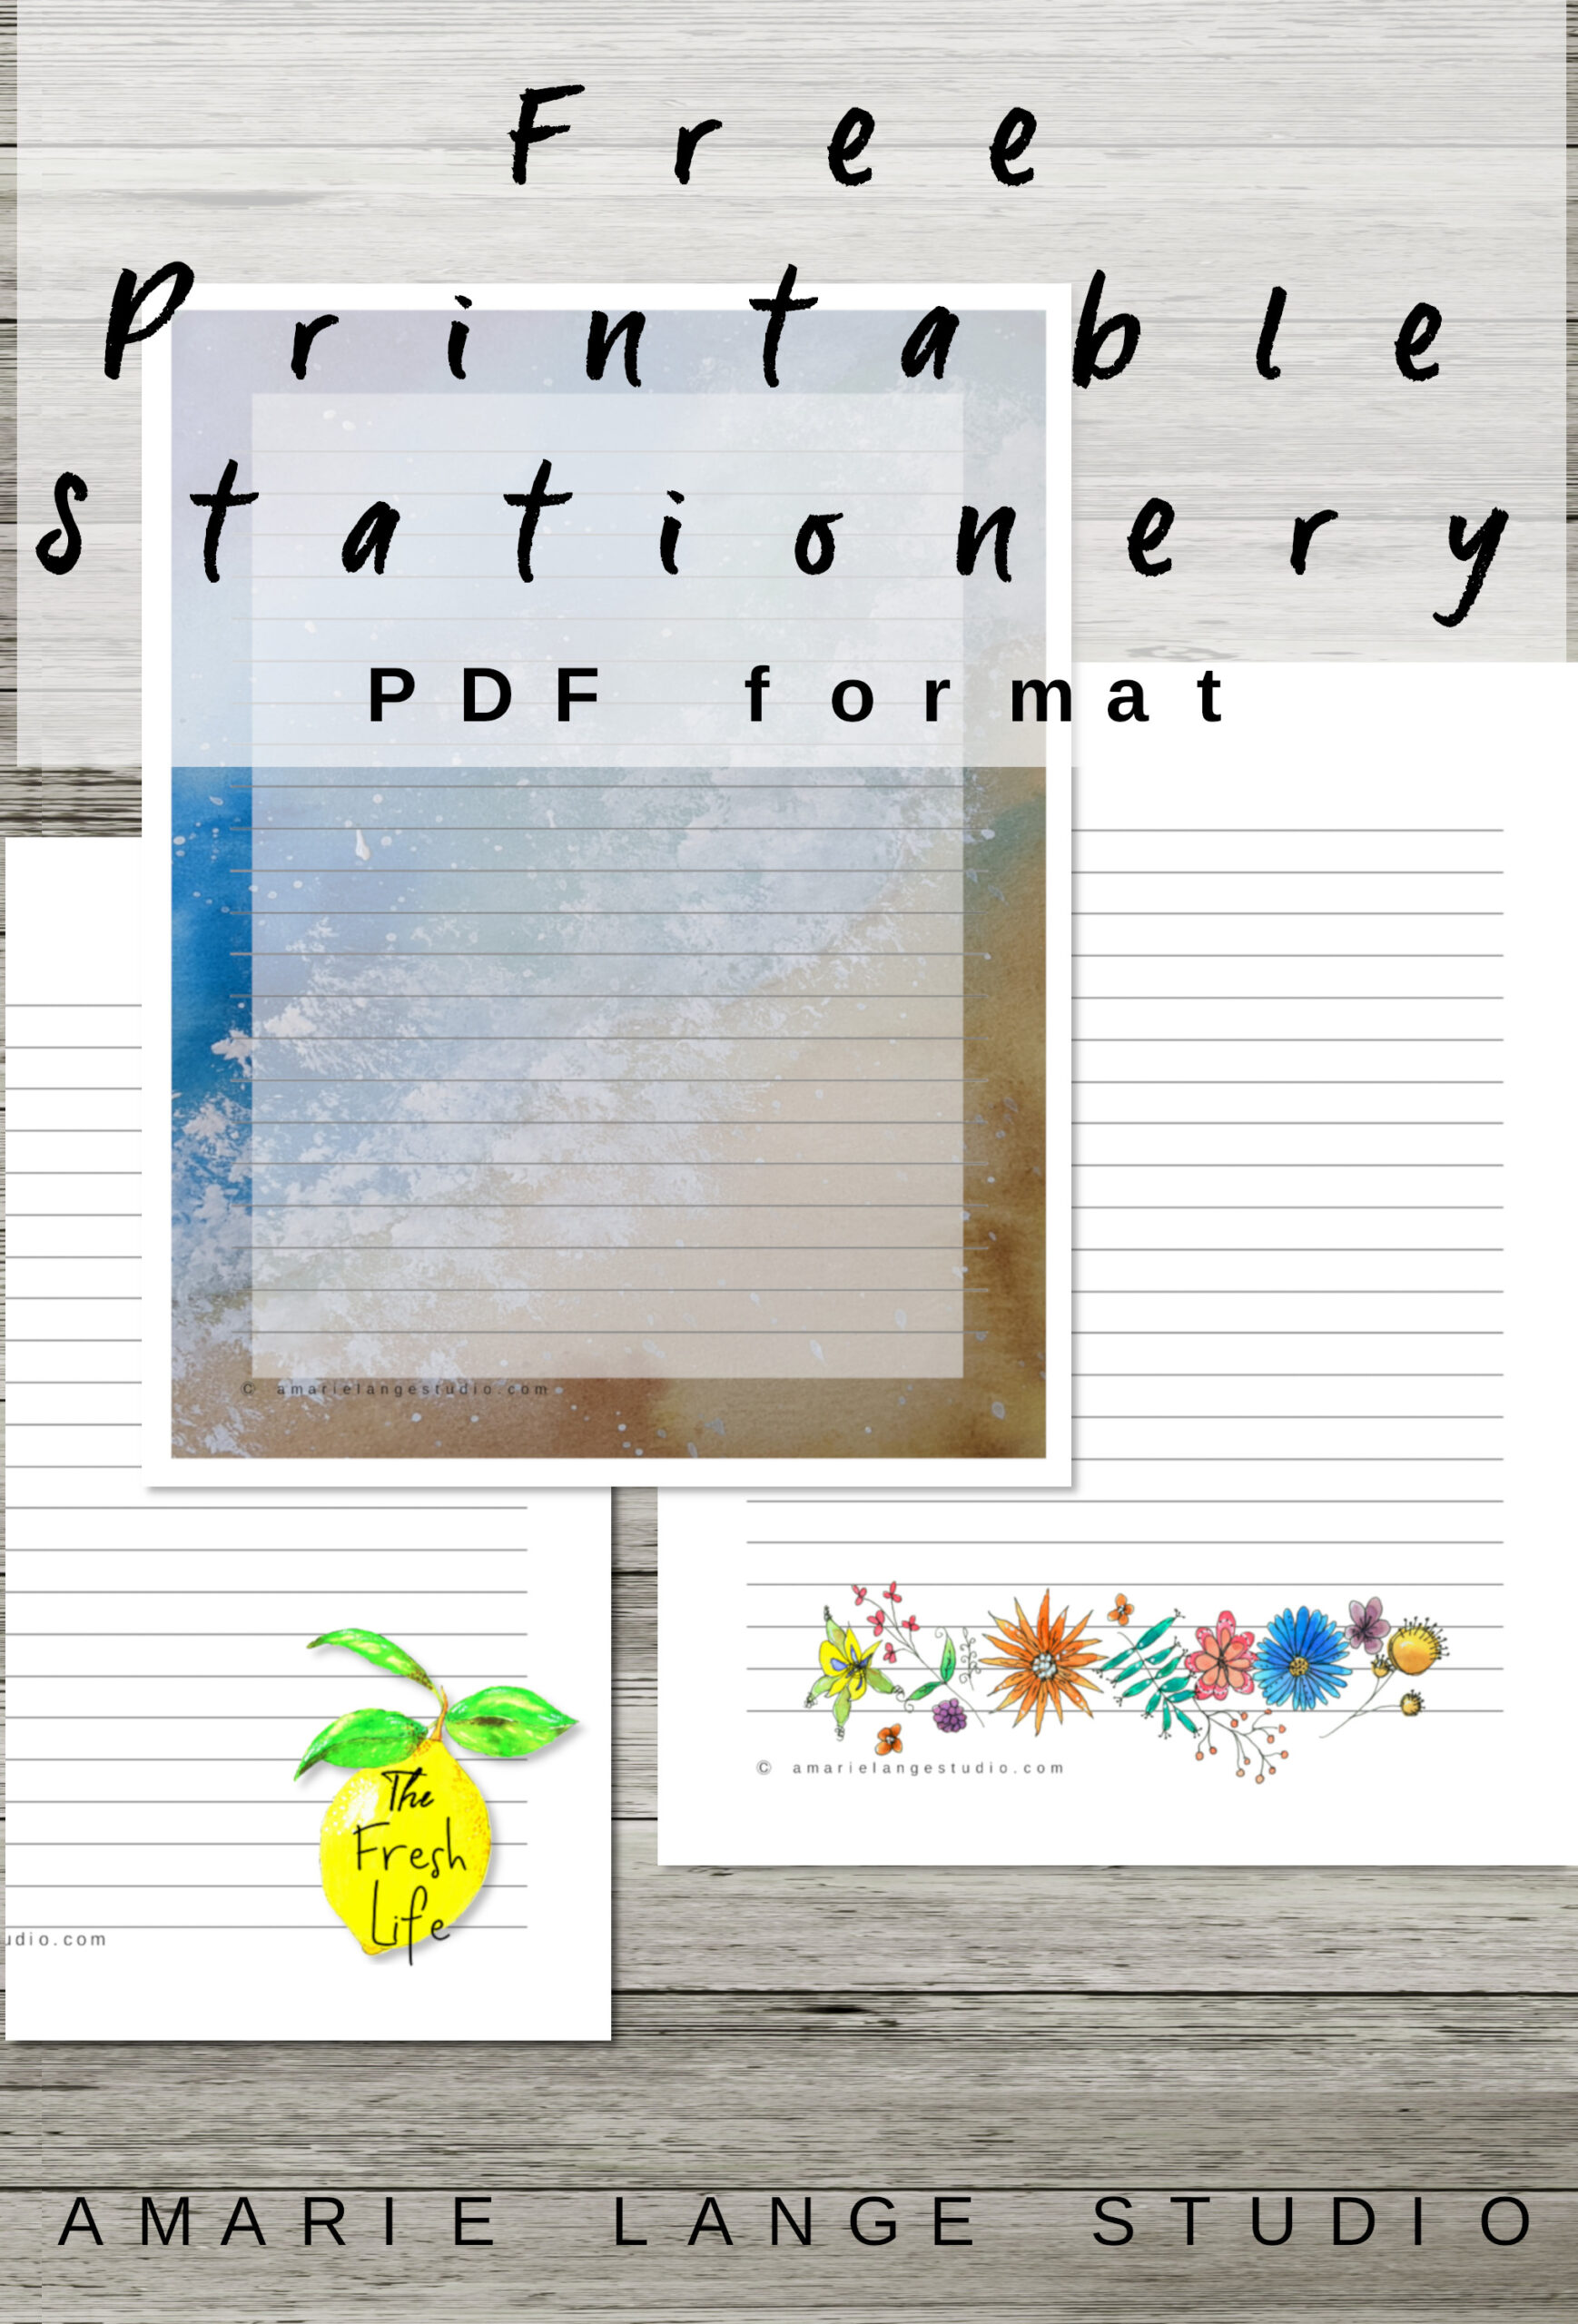 Free stationery samples for artistic projects